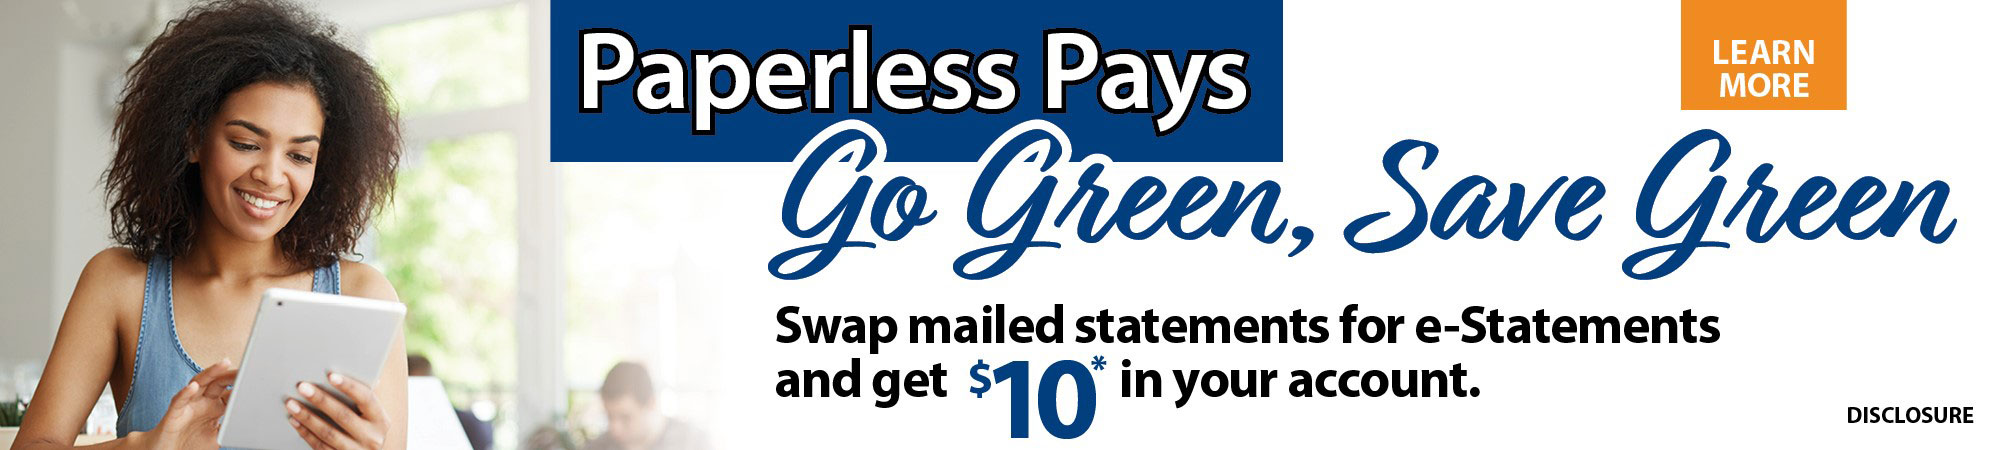 Paperless Pays! Go Green. Save Green